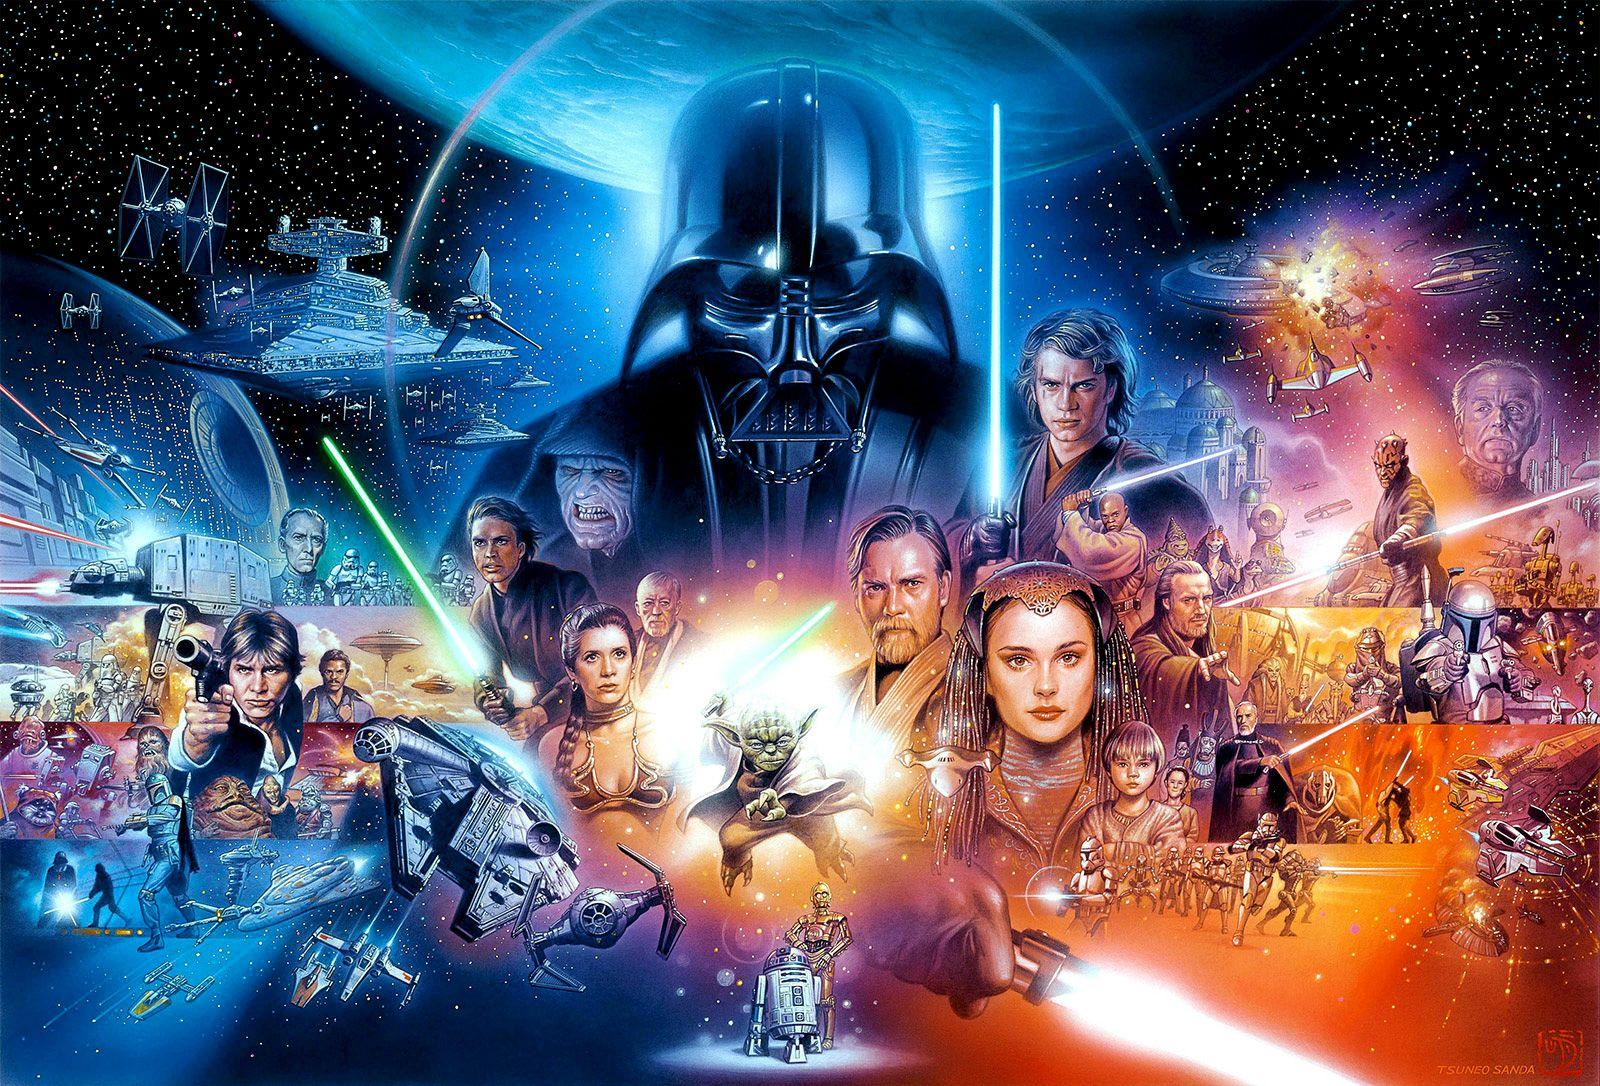 Star Wars Episode IV  A New Hope iPhone 6 Plus HD Wallpaper Poster 